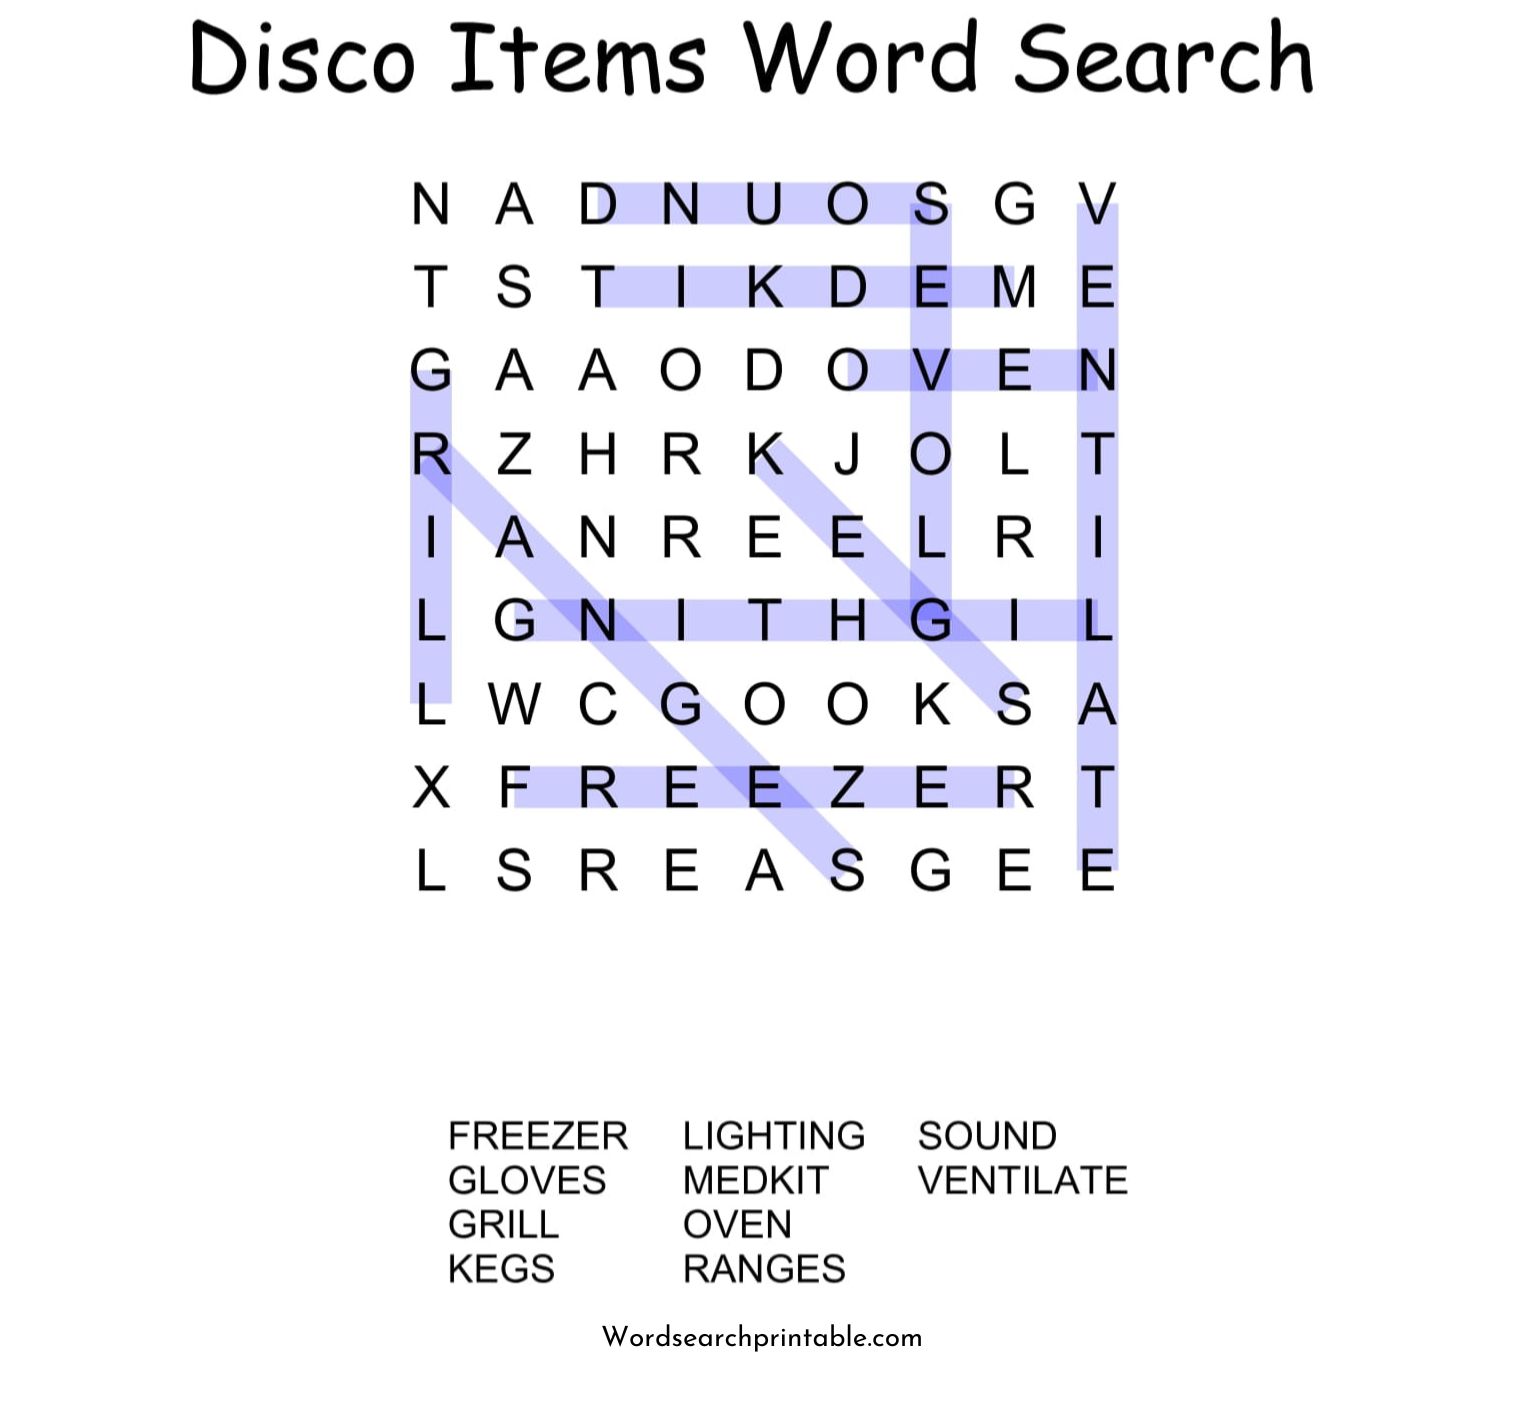 disco items word search puzzle solution